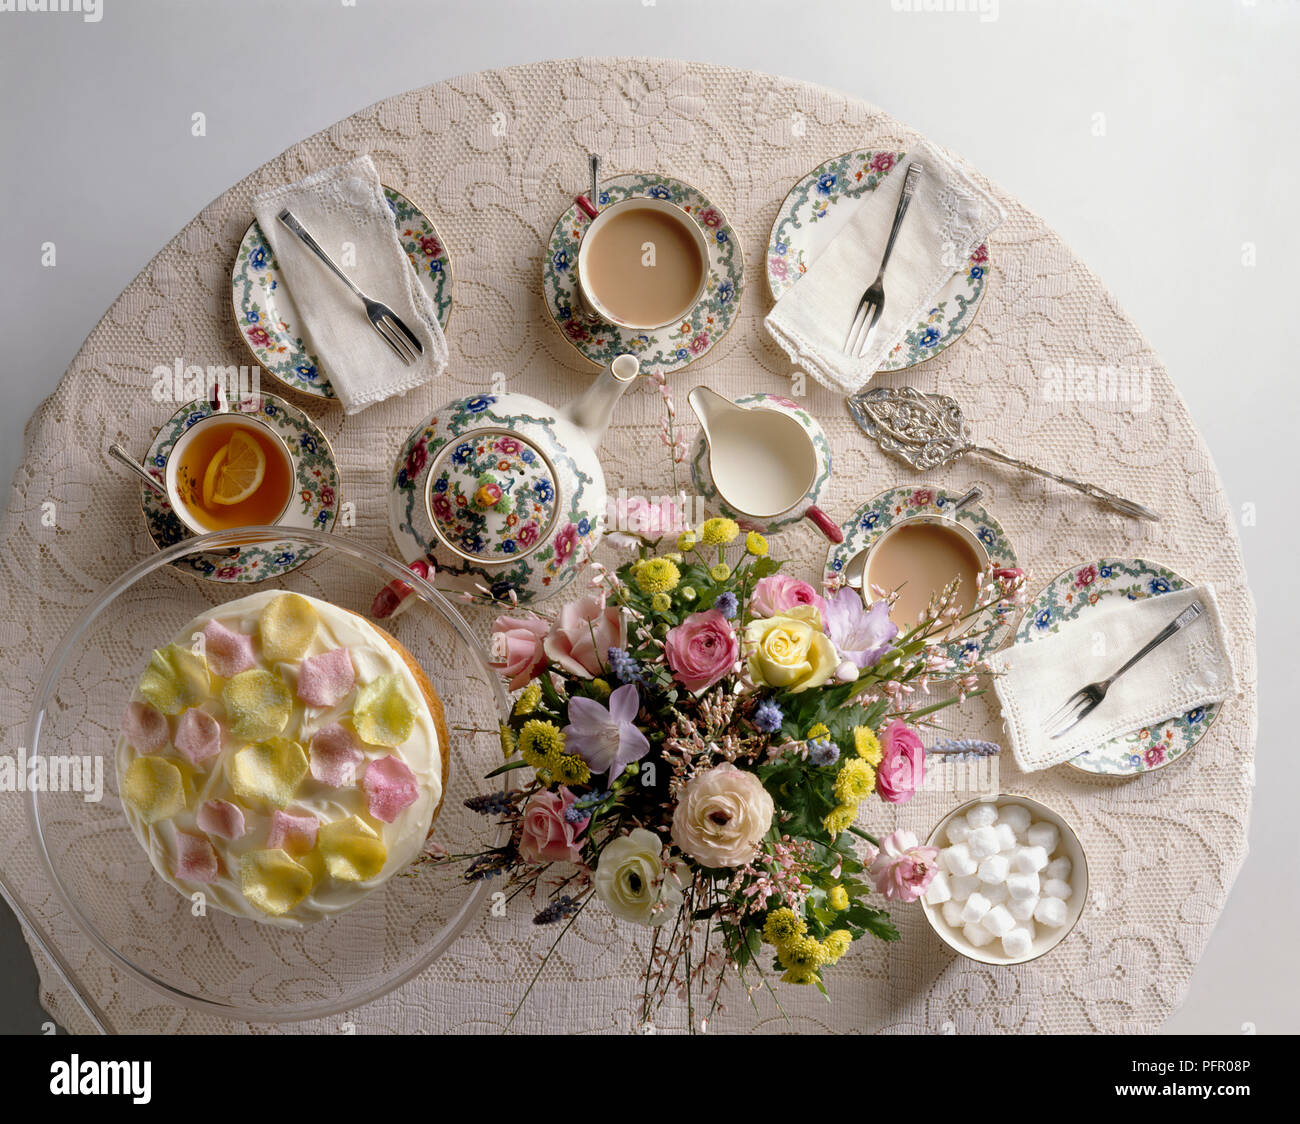 Table set for afternoon tea with bone china tea set, flower arrangement in centre, and cake decorated with rose petals Stock Photo